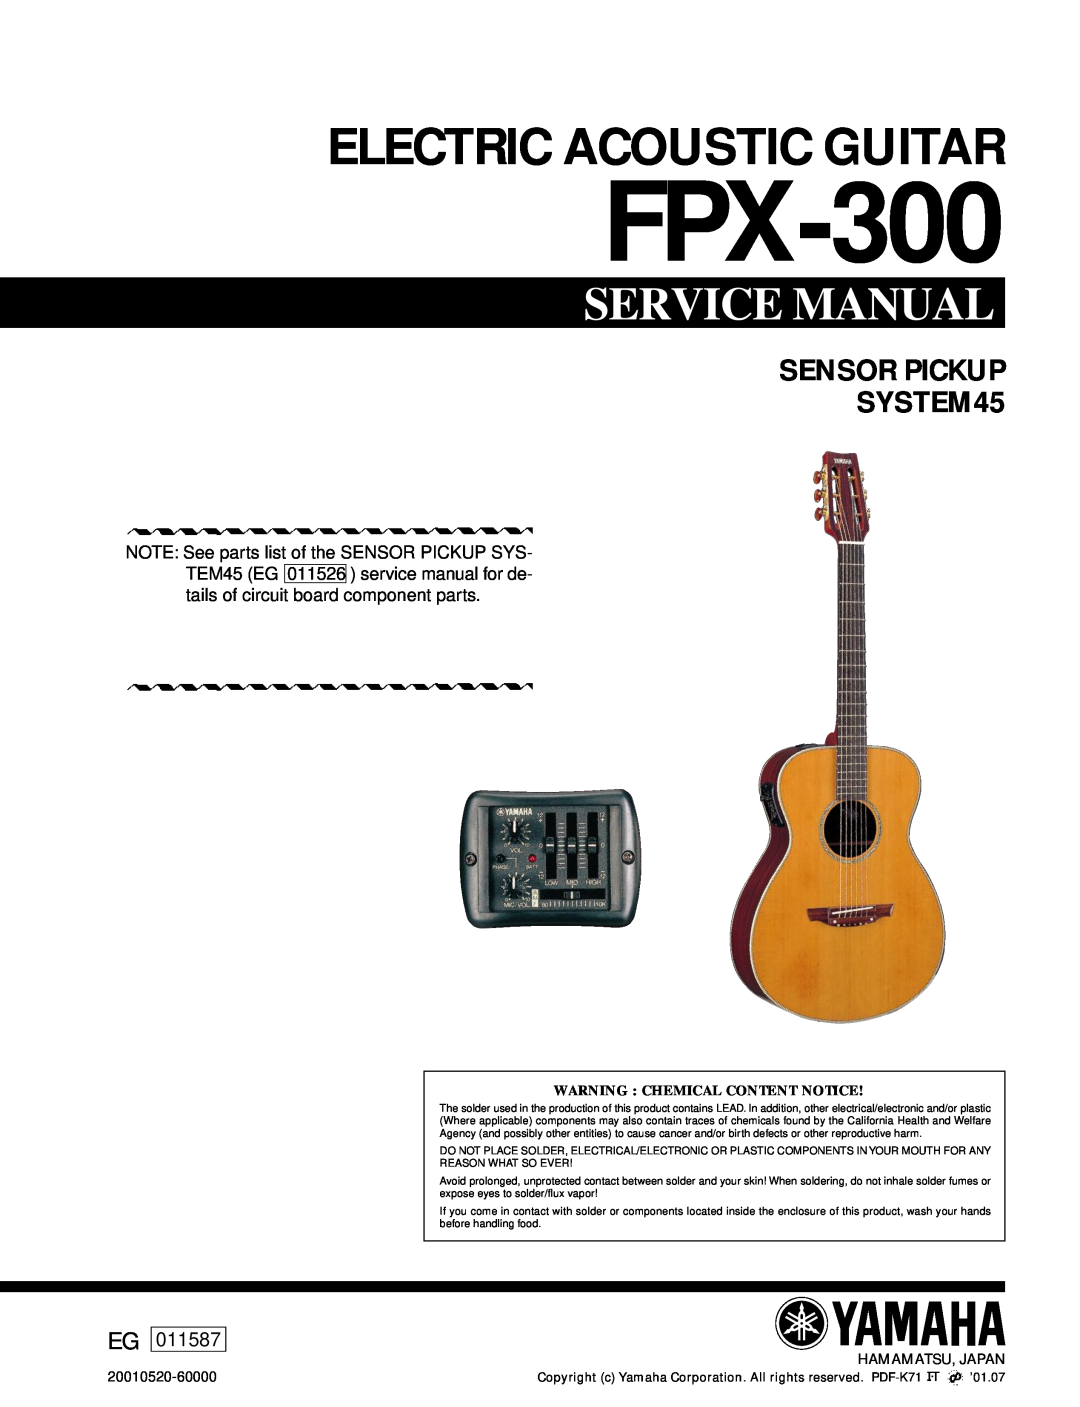 Yamaha FPX-300 service manual Electric Acoustic Guitar, SENSOR PICKUP SYSTEM45, 011587, Warning Chemical Content Notice 